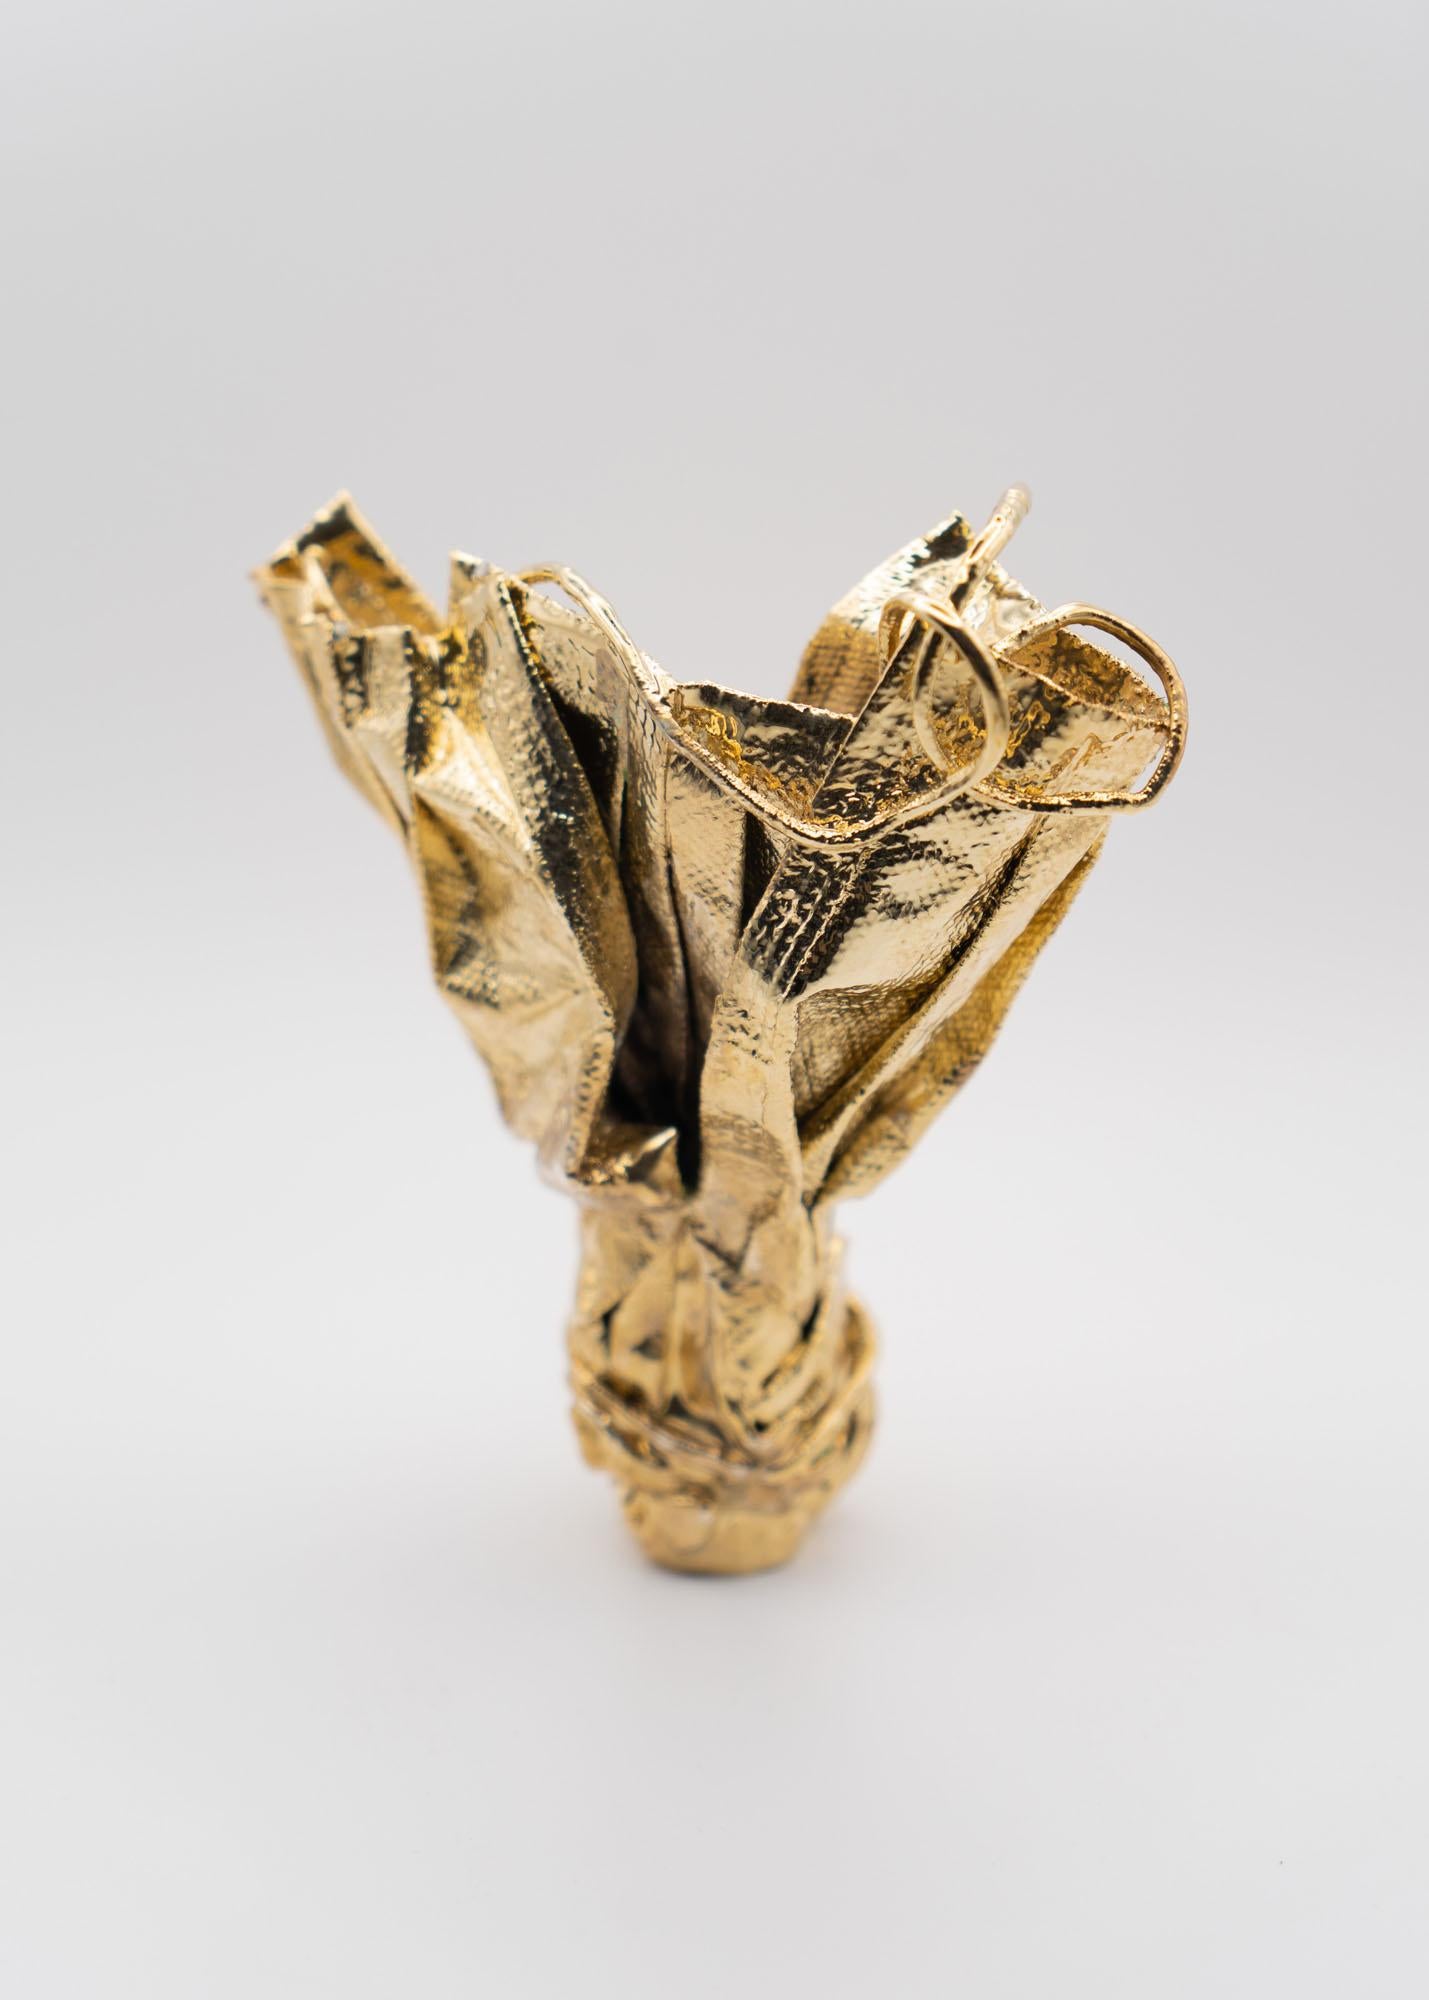 Post-Modern Remask Act 011 Gold Art Object Made from Surgical Mask by Enrico Girotti For Sale